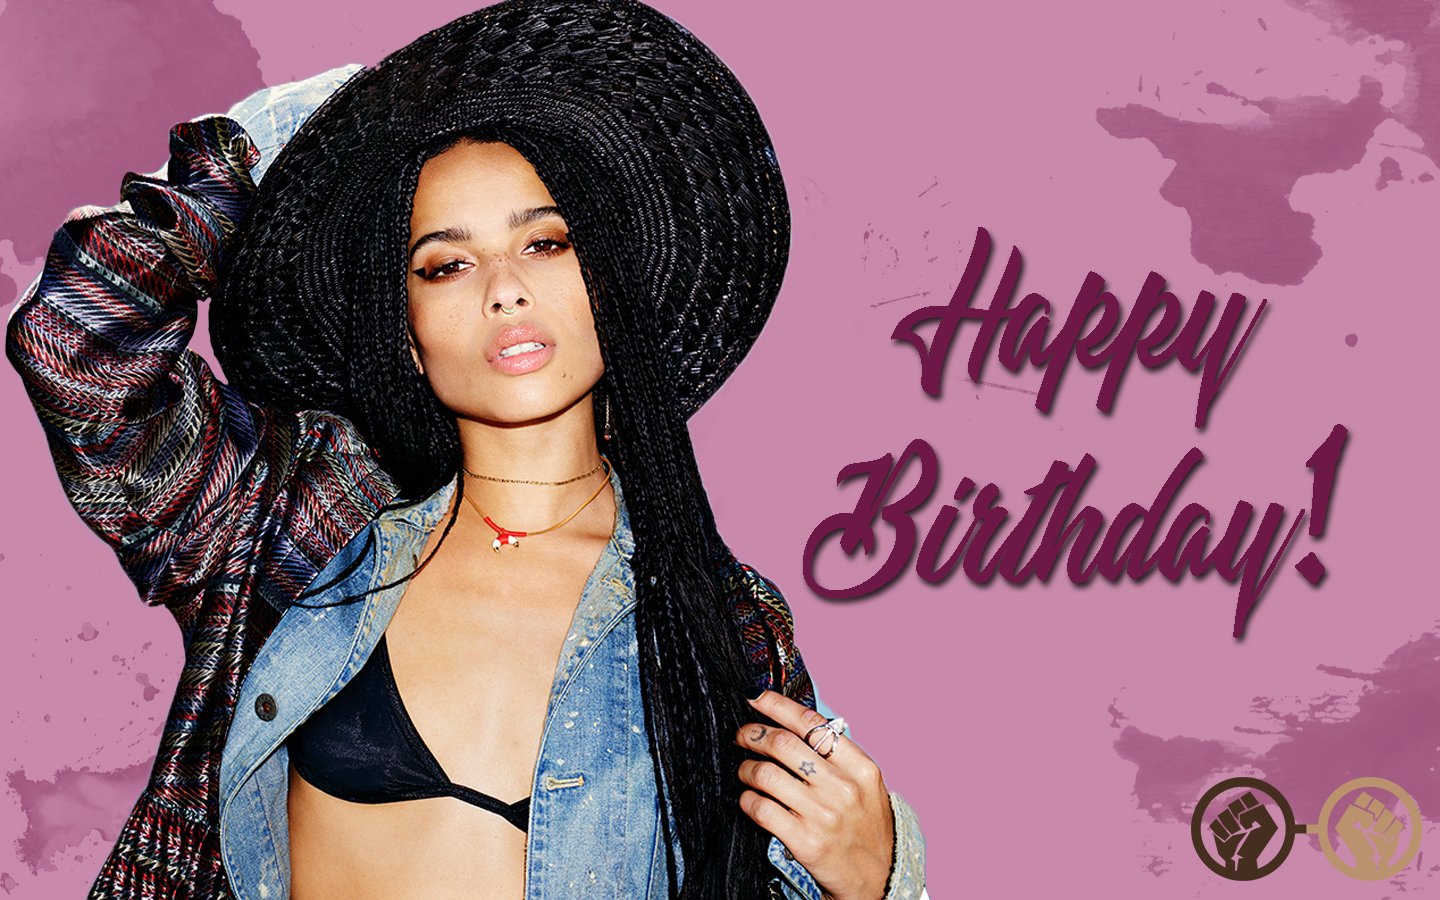 Happy Birthday, Zoë Kravitz! The talented actress, model, and singer turns 29 today! 